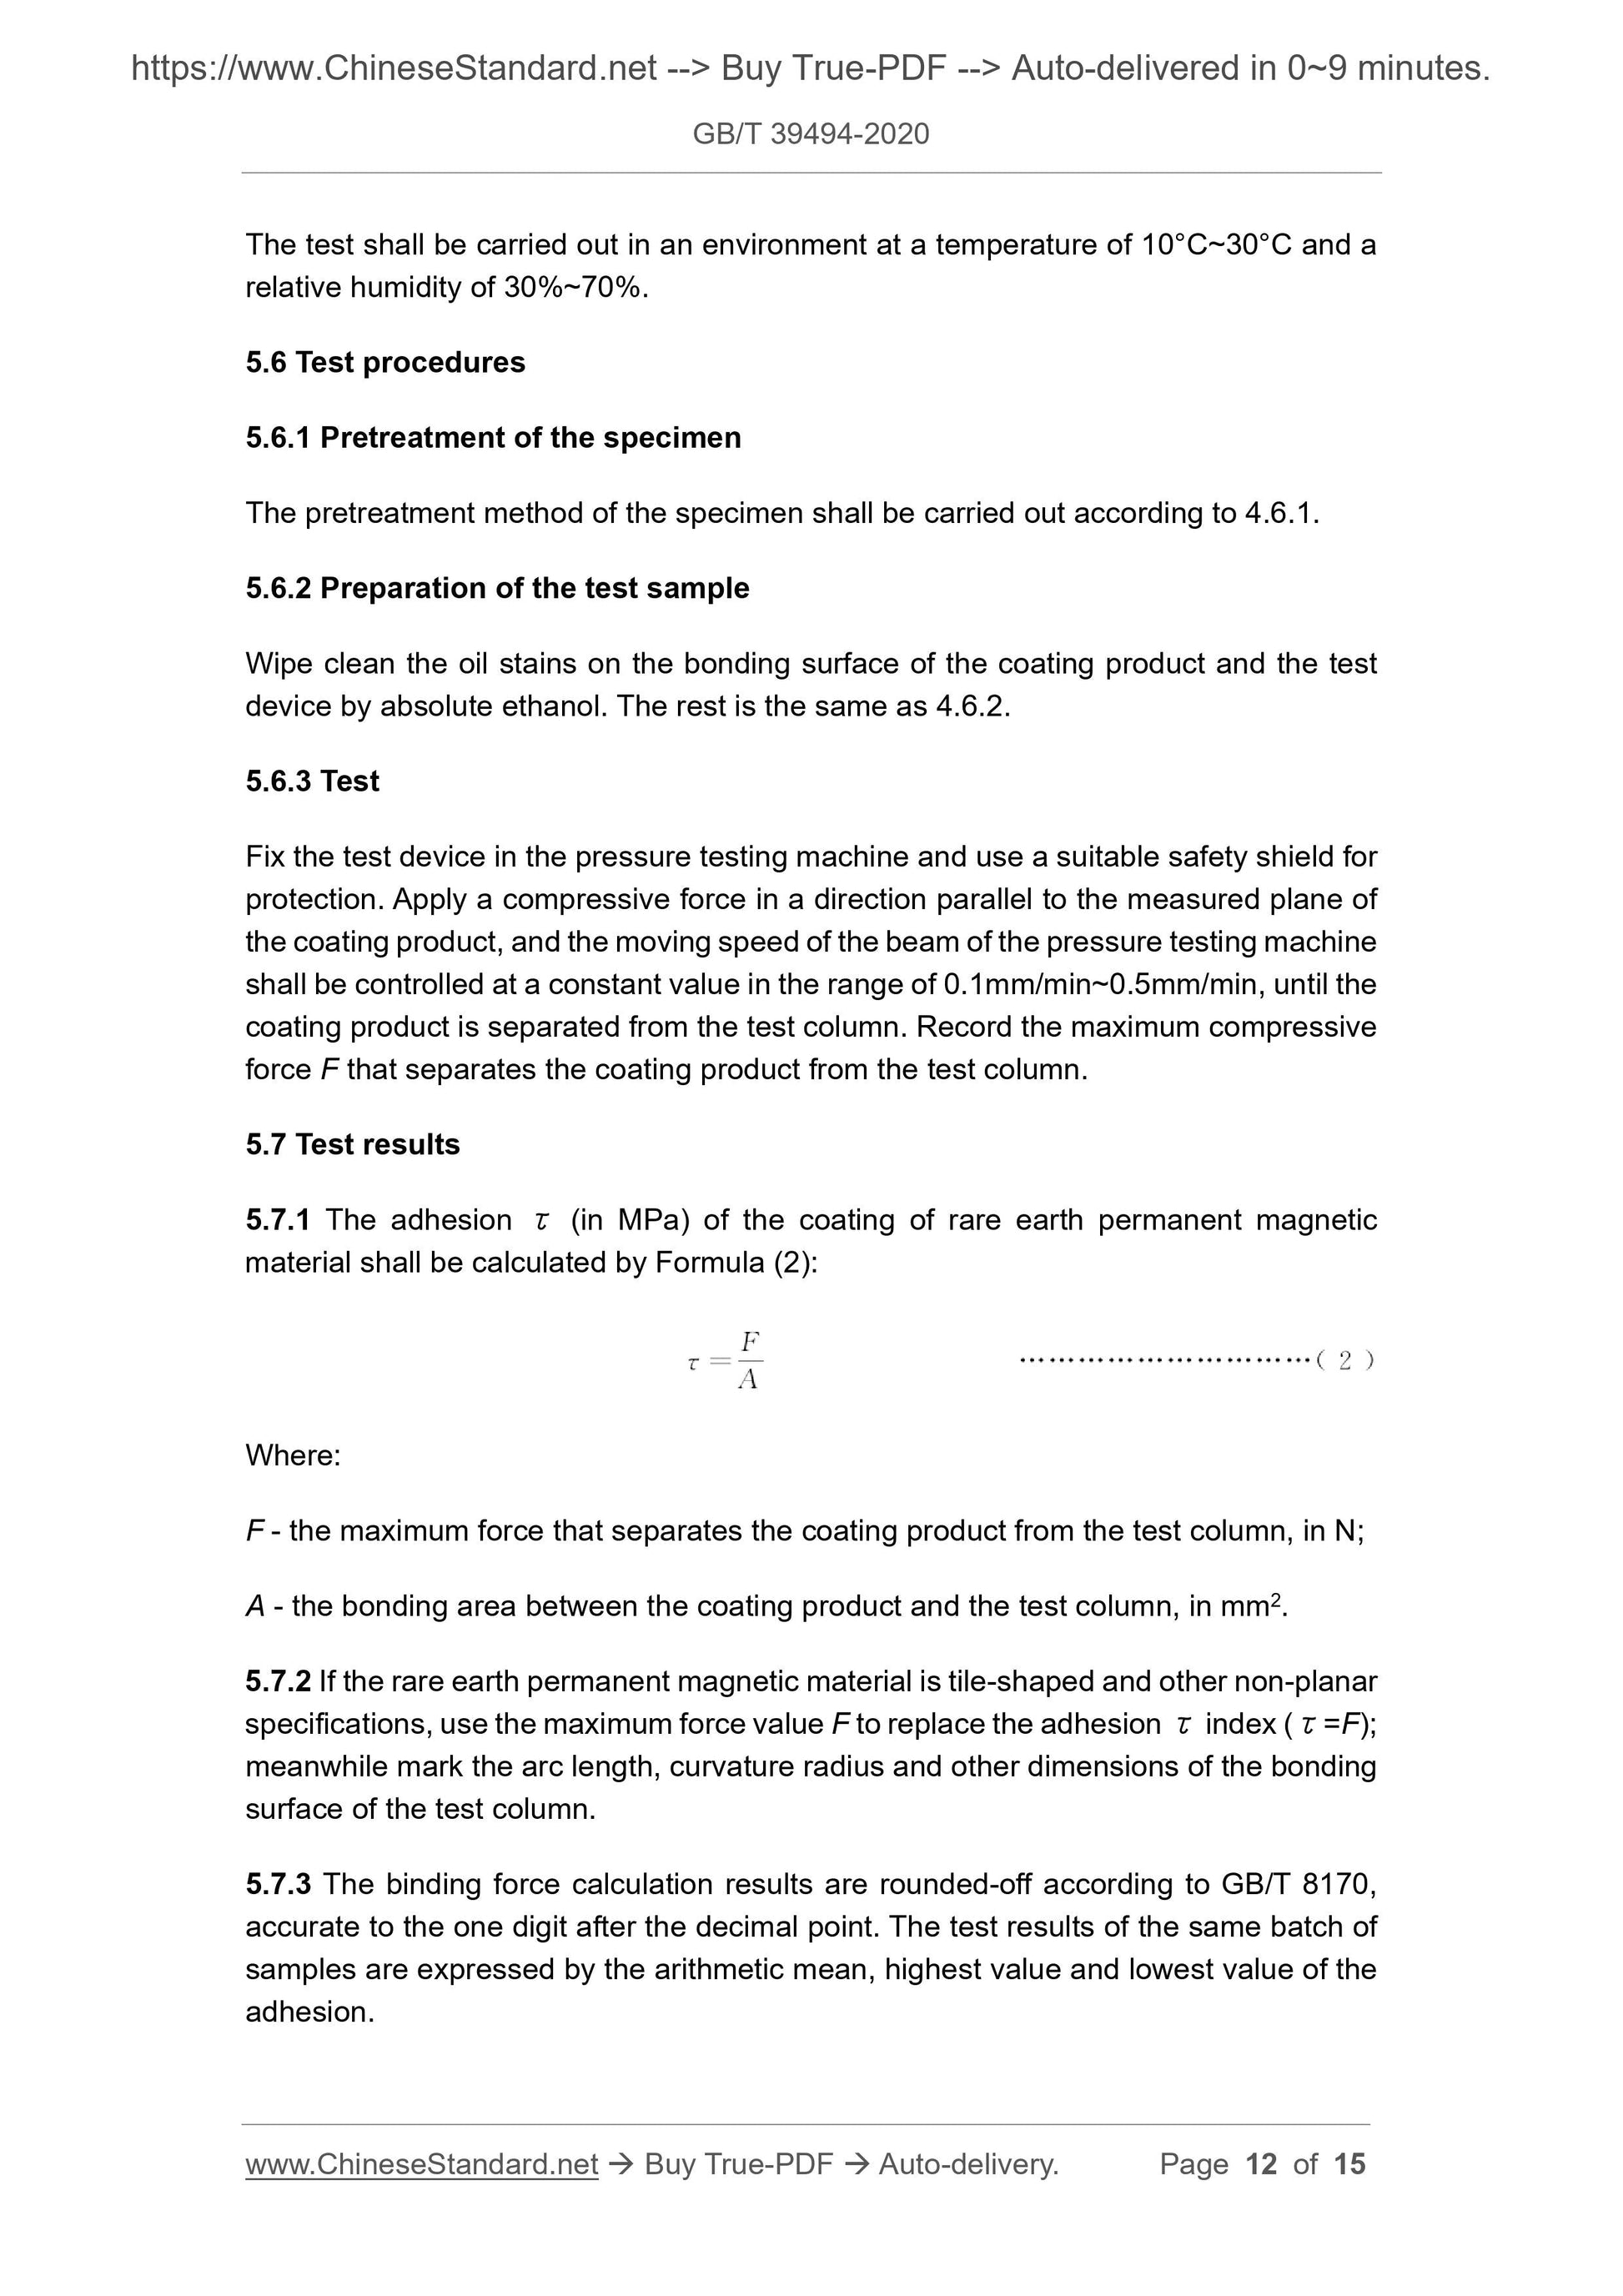 GB/T 39494-2020 Page 7